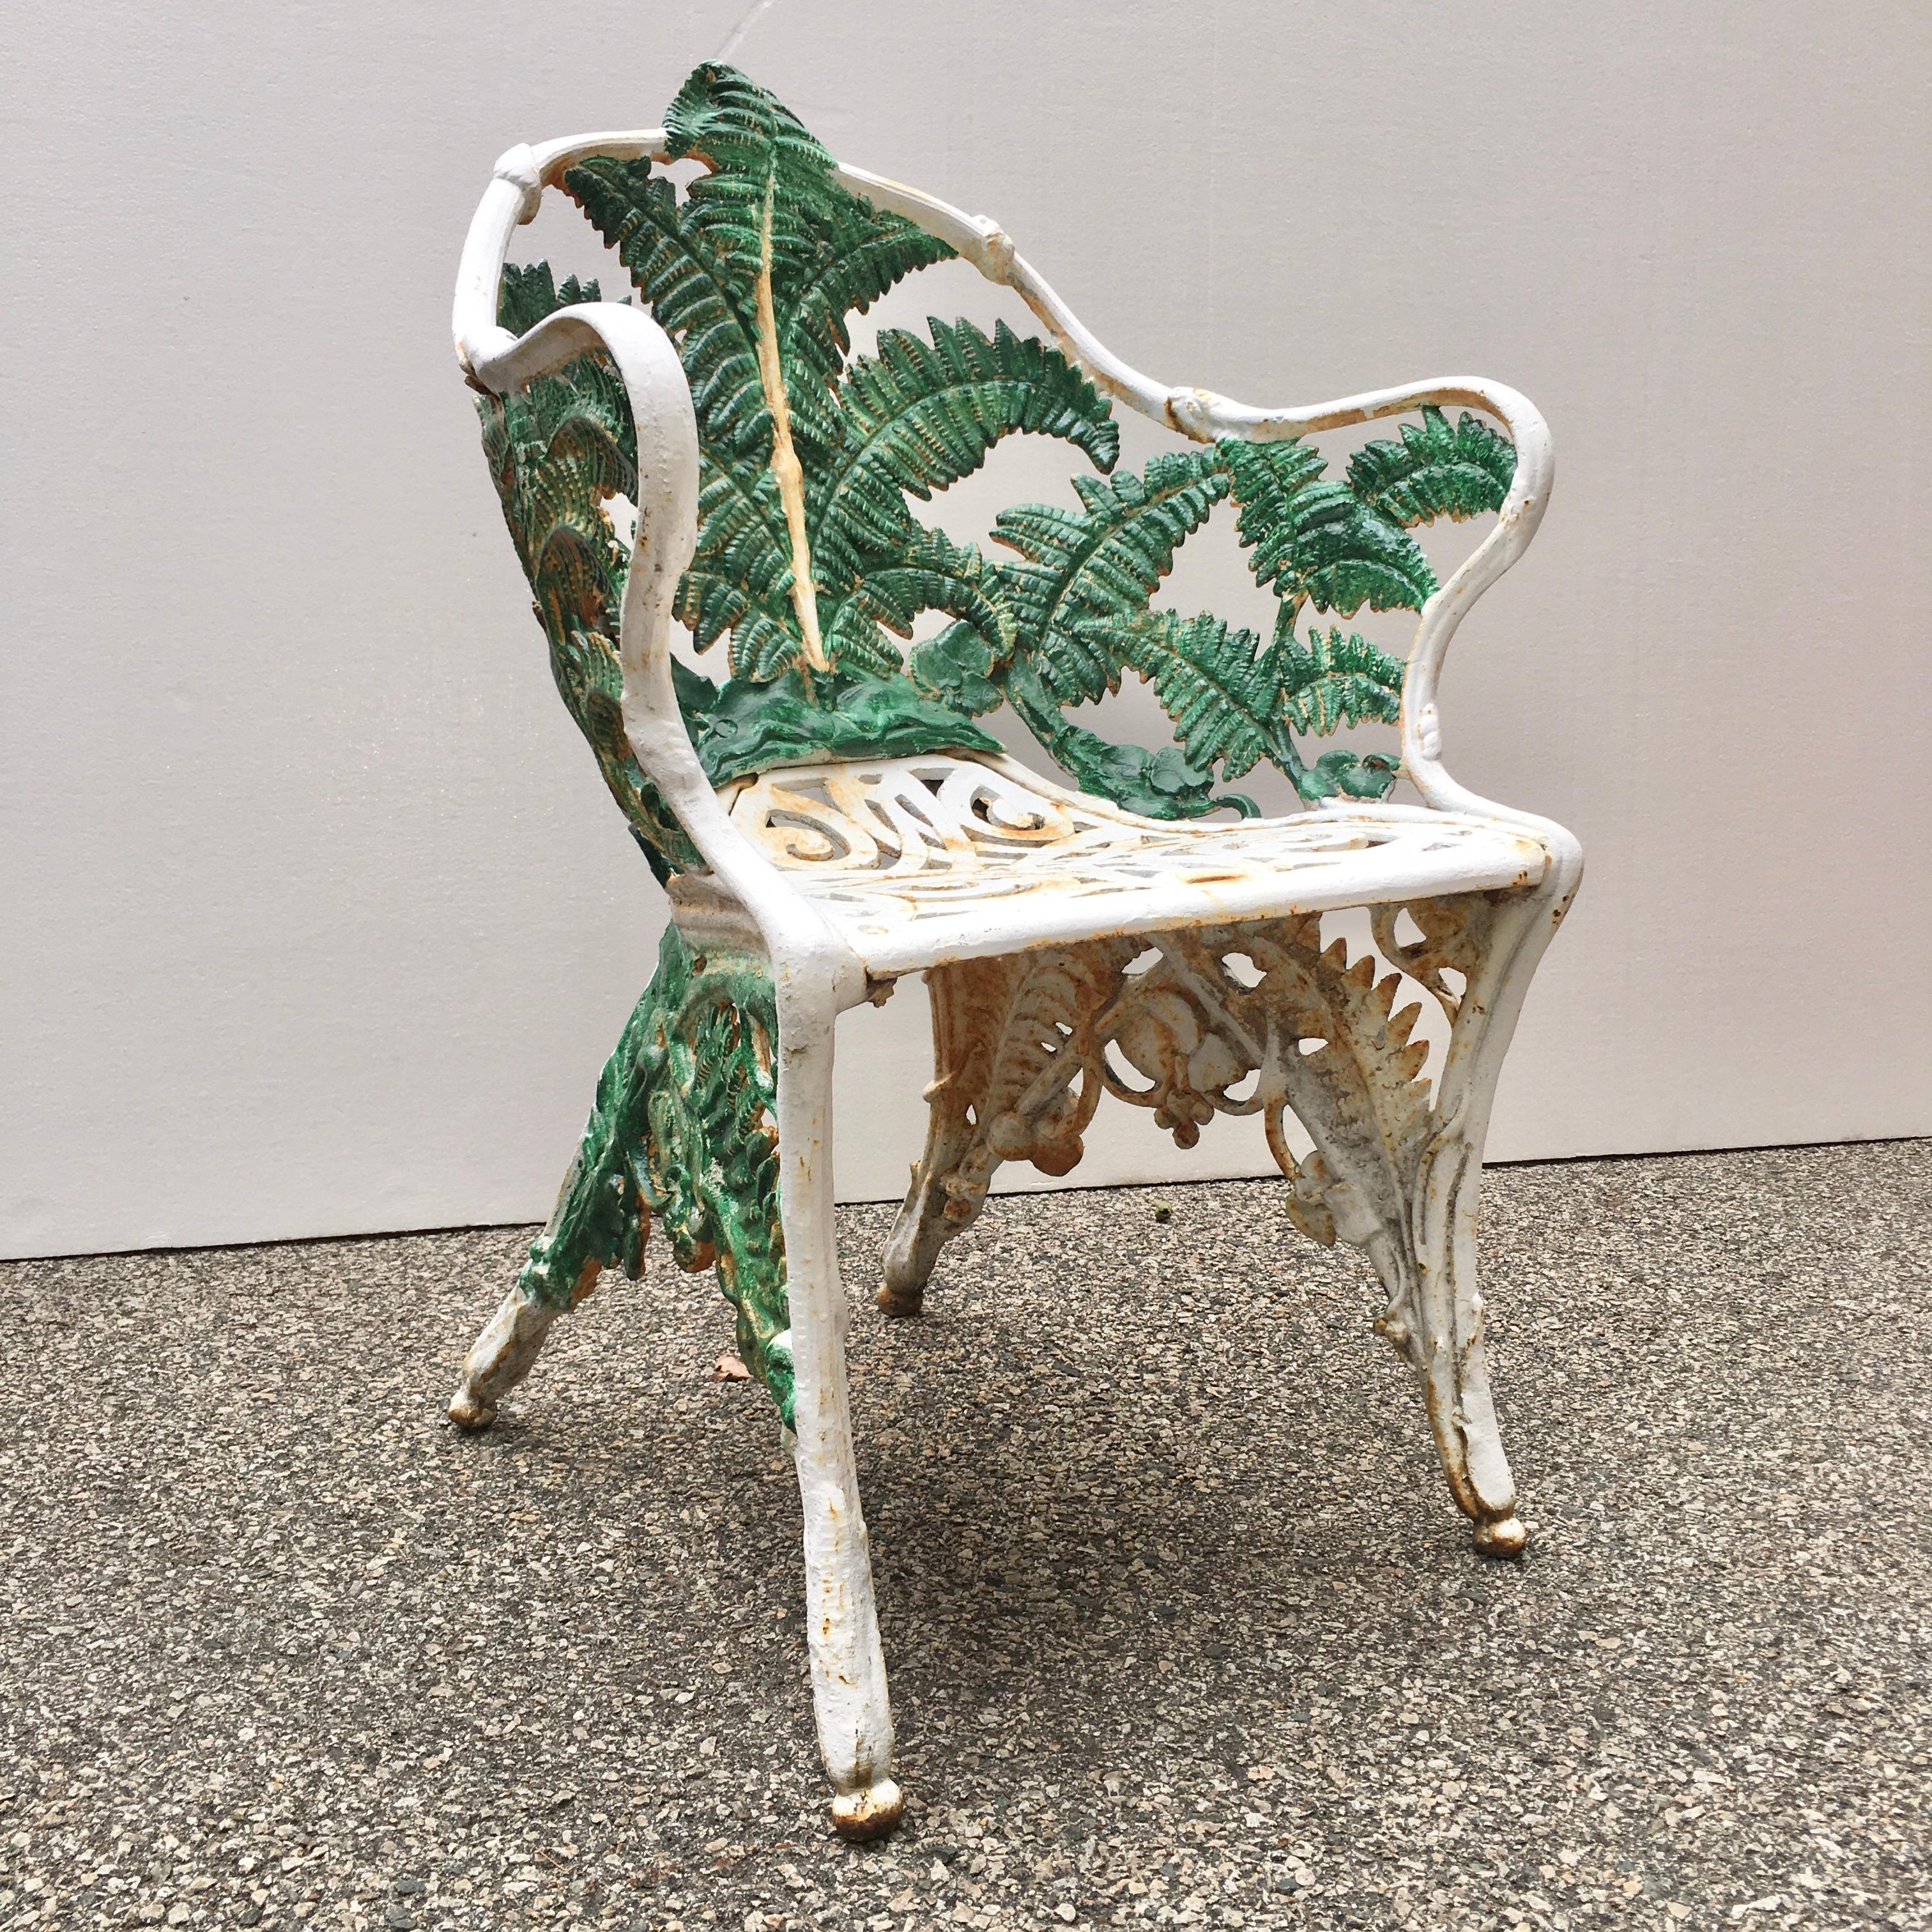 Cast iron Fern and Blackberry pattern garden chair with shaped pierced scroll work seat and older repaint in white and green.
The chair features well-defined foliage pattern on the interior back and arms of the bench with foliage cast on both inner